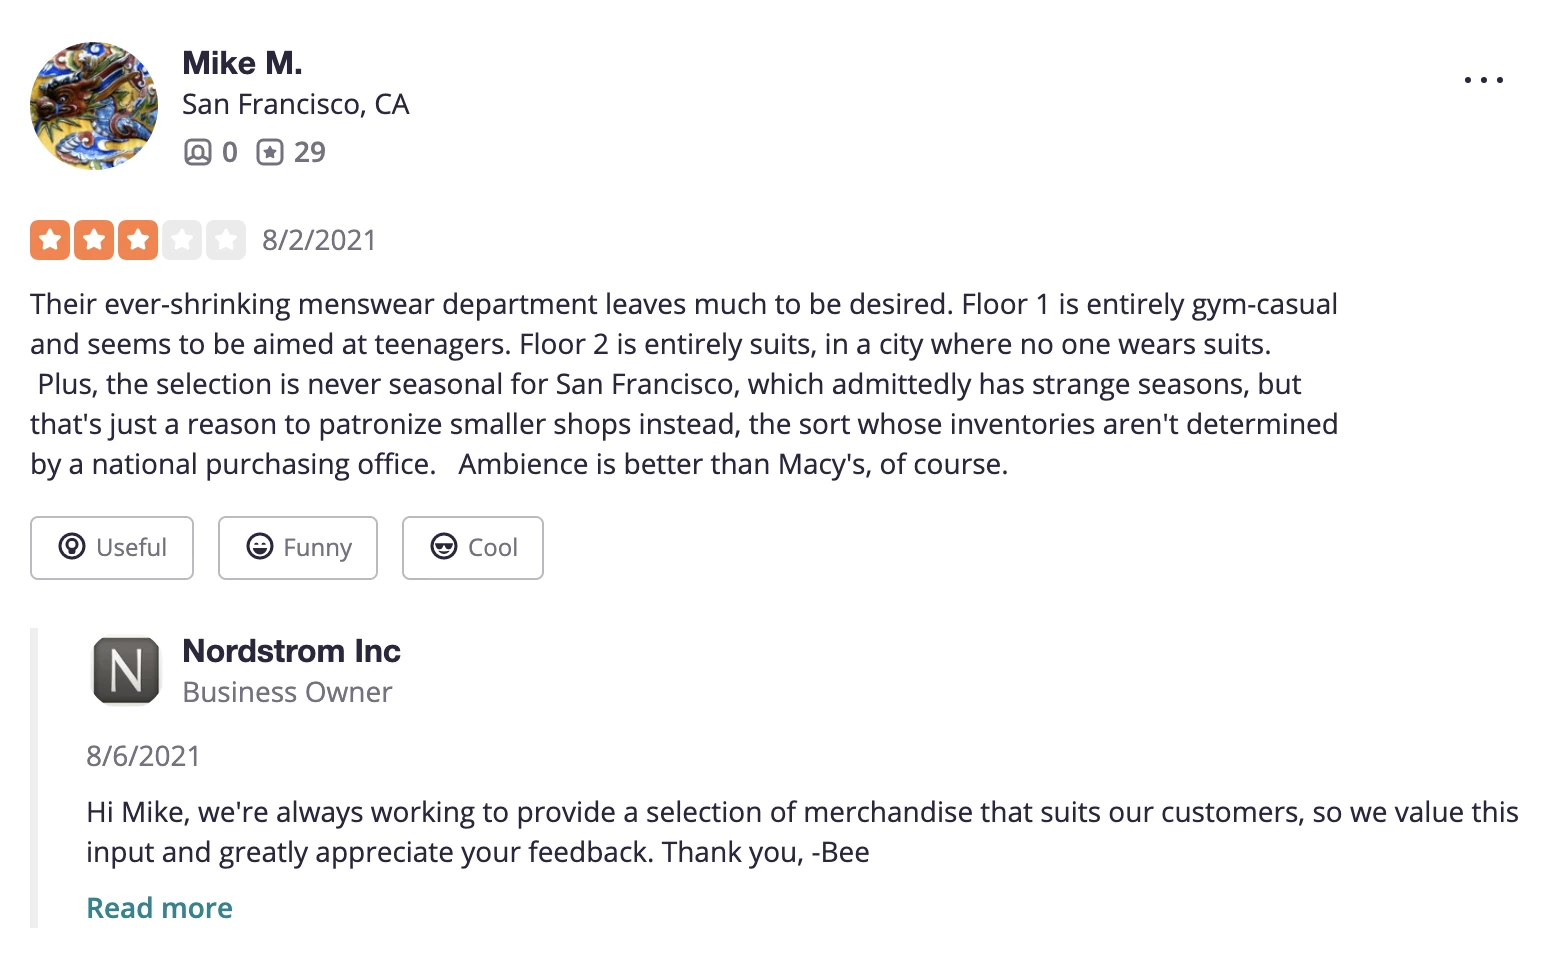 Example of a negative product / experience review being responded to. 